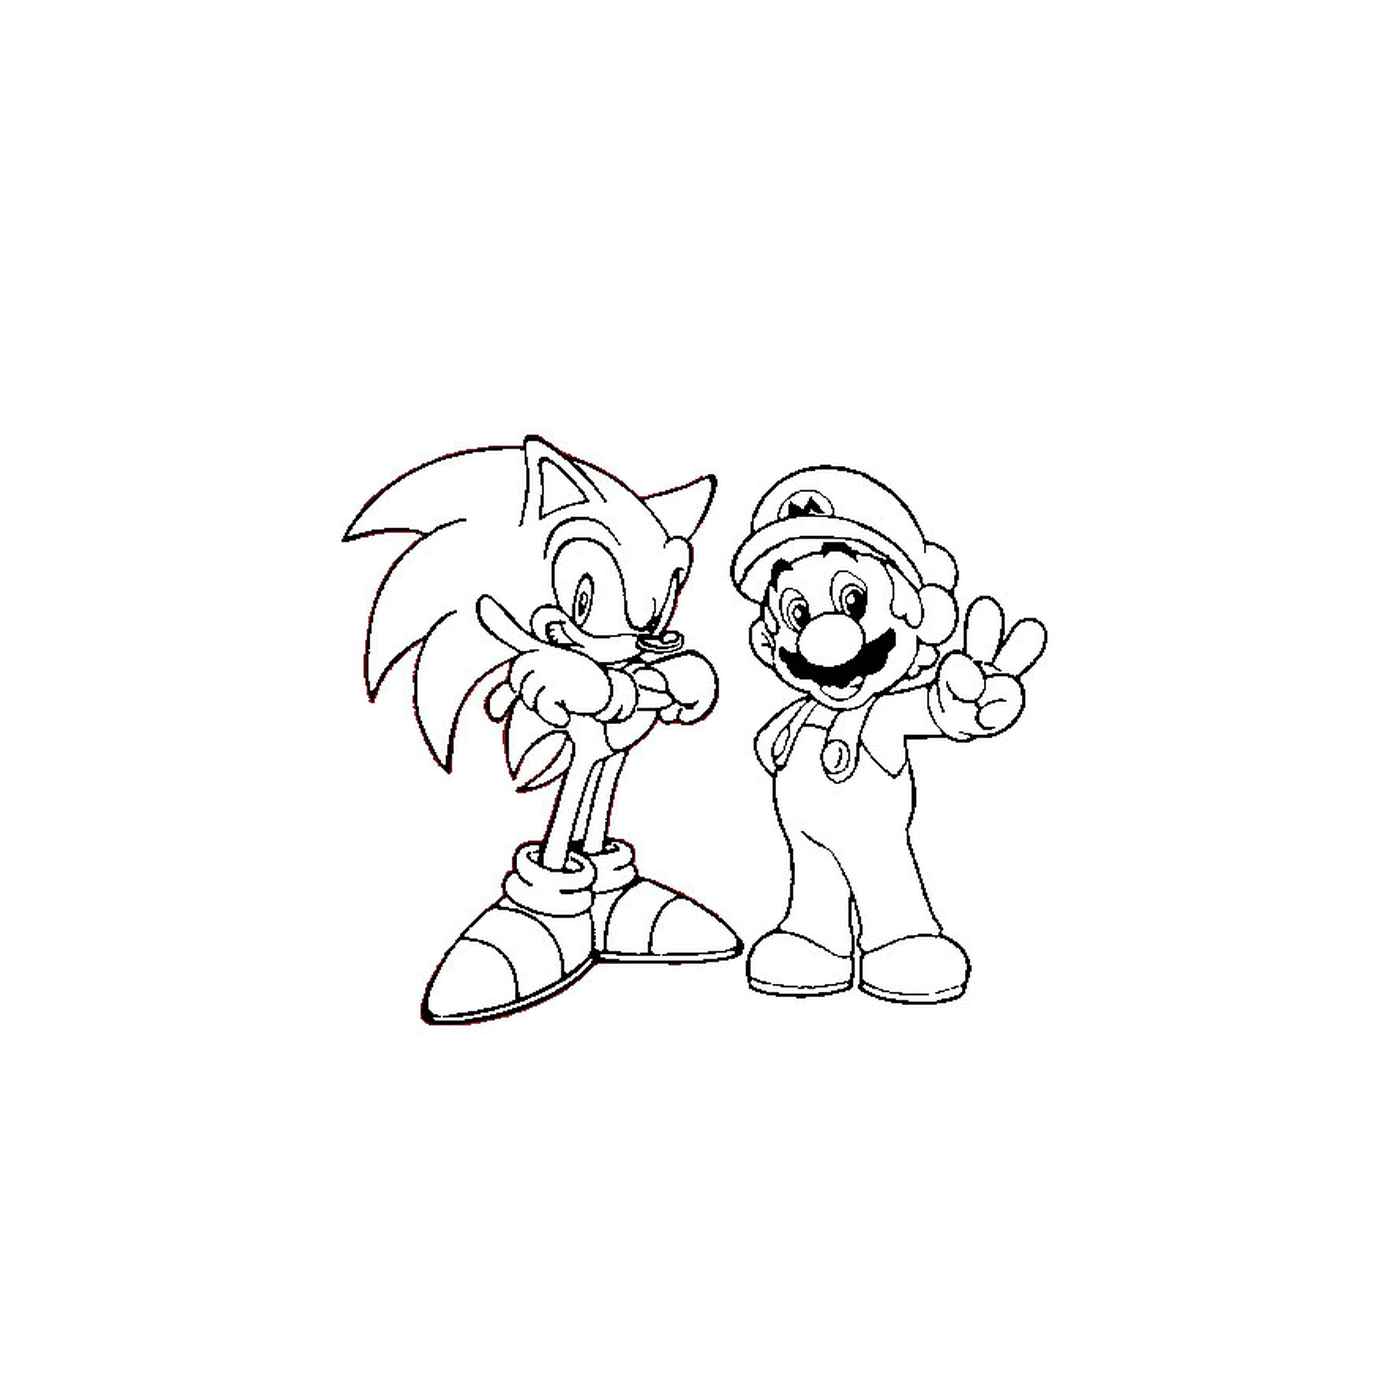  Mario and Sonic together 